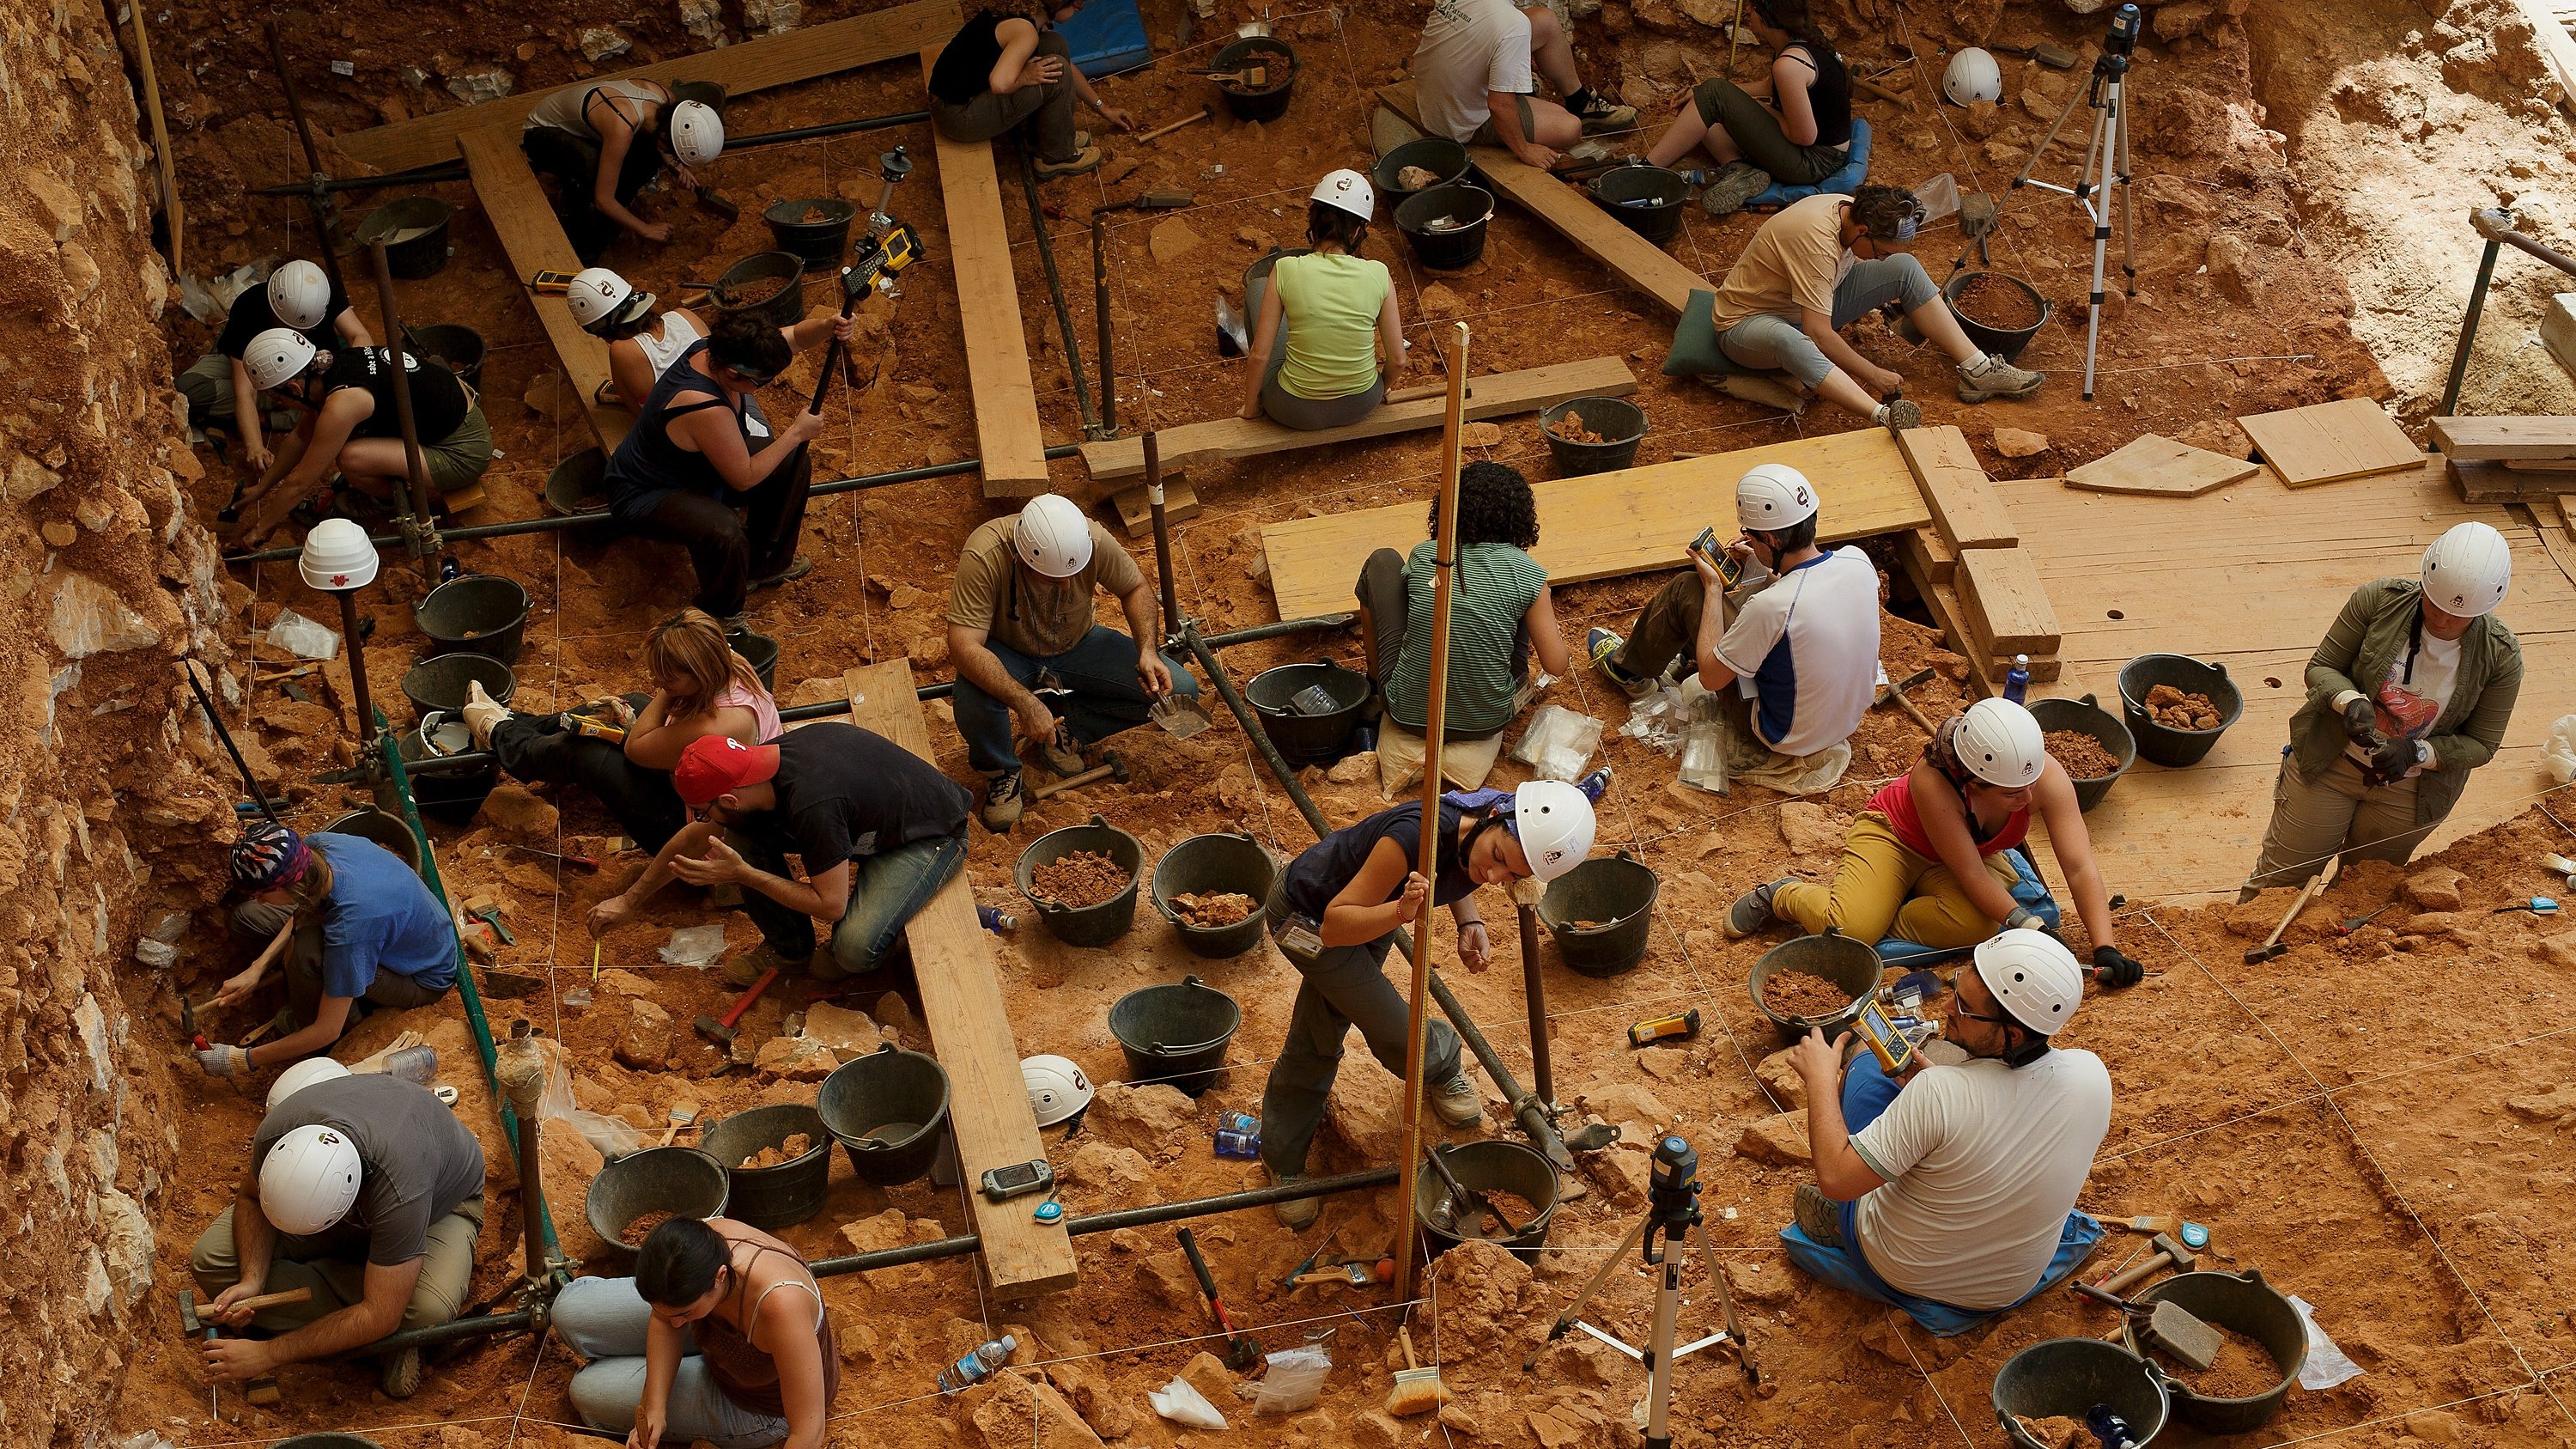 Works at Atapuerca Archeological Site